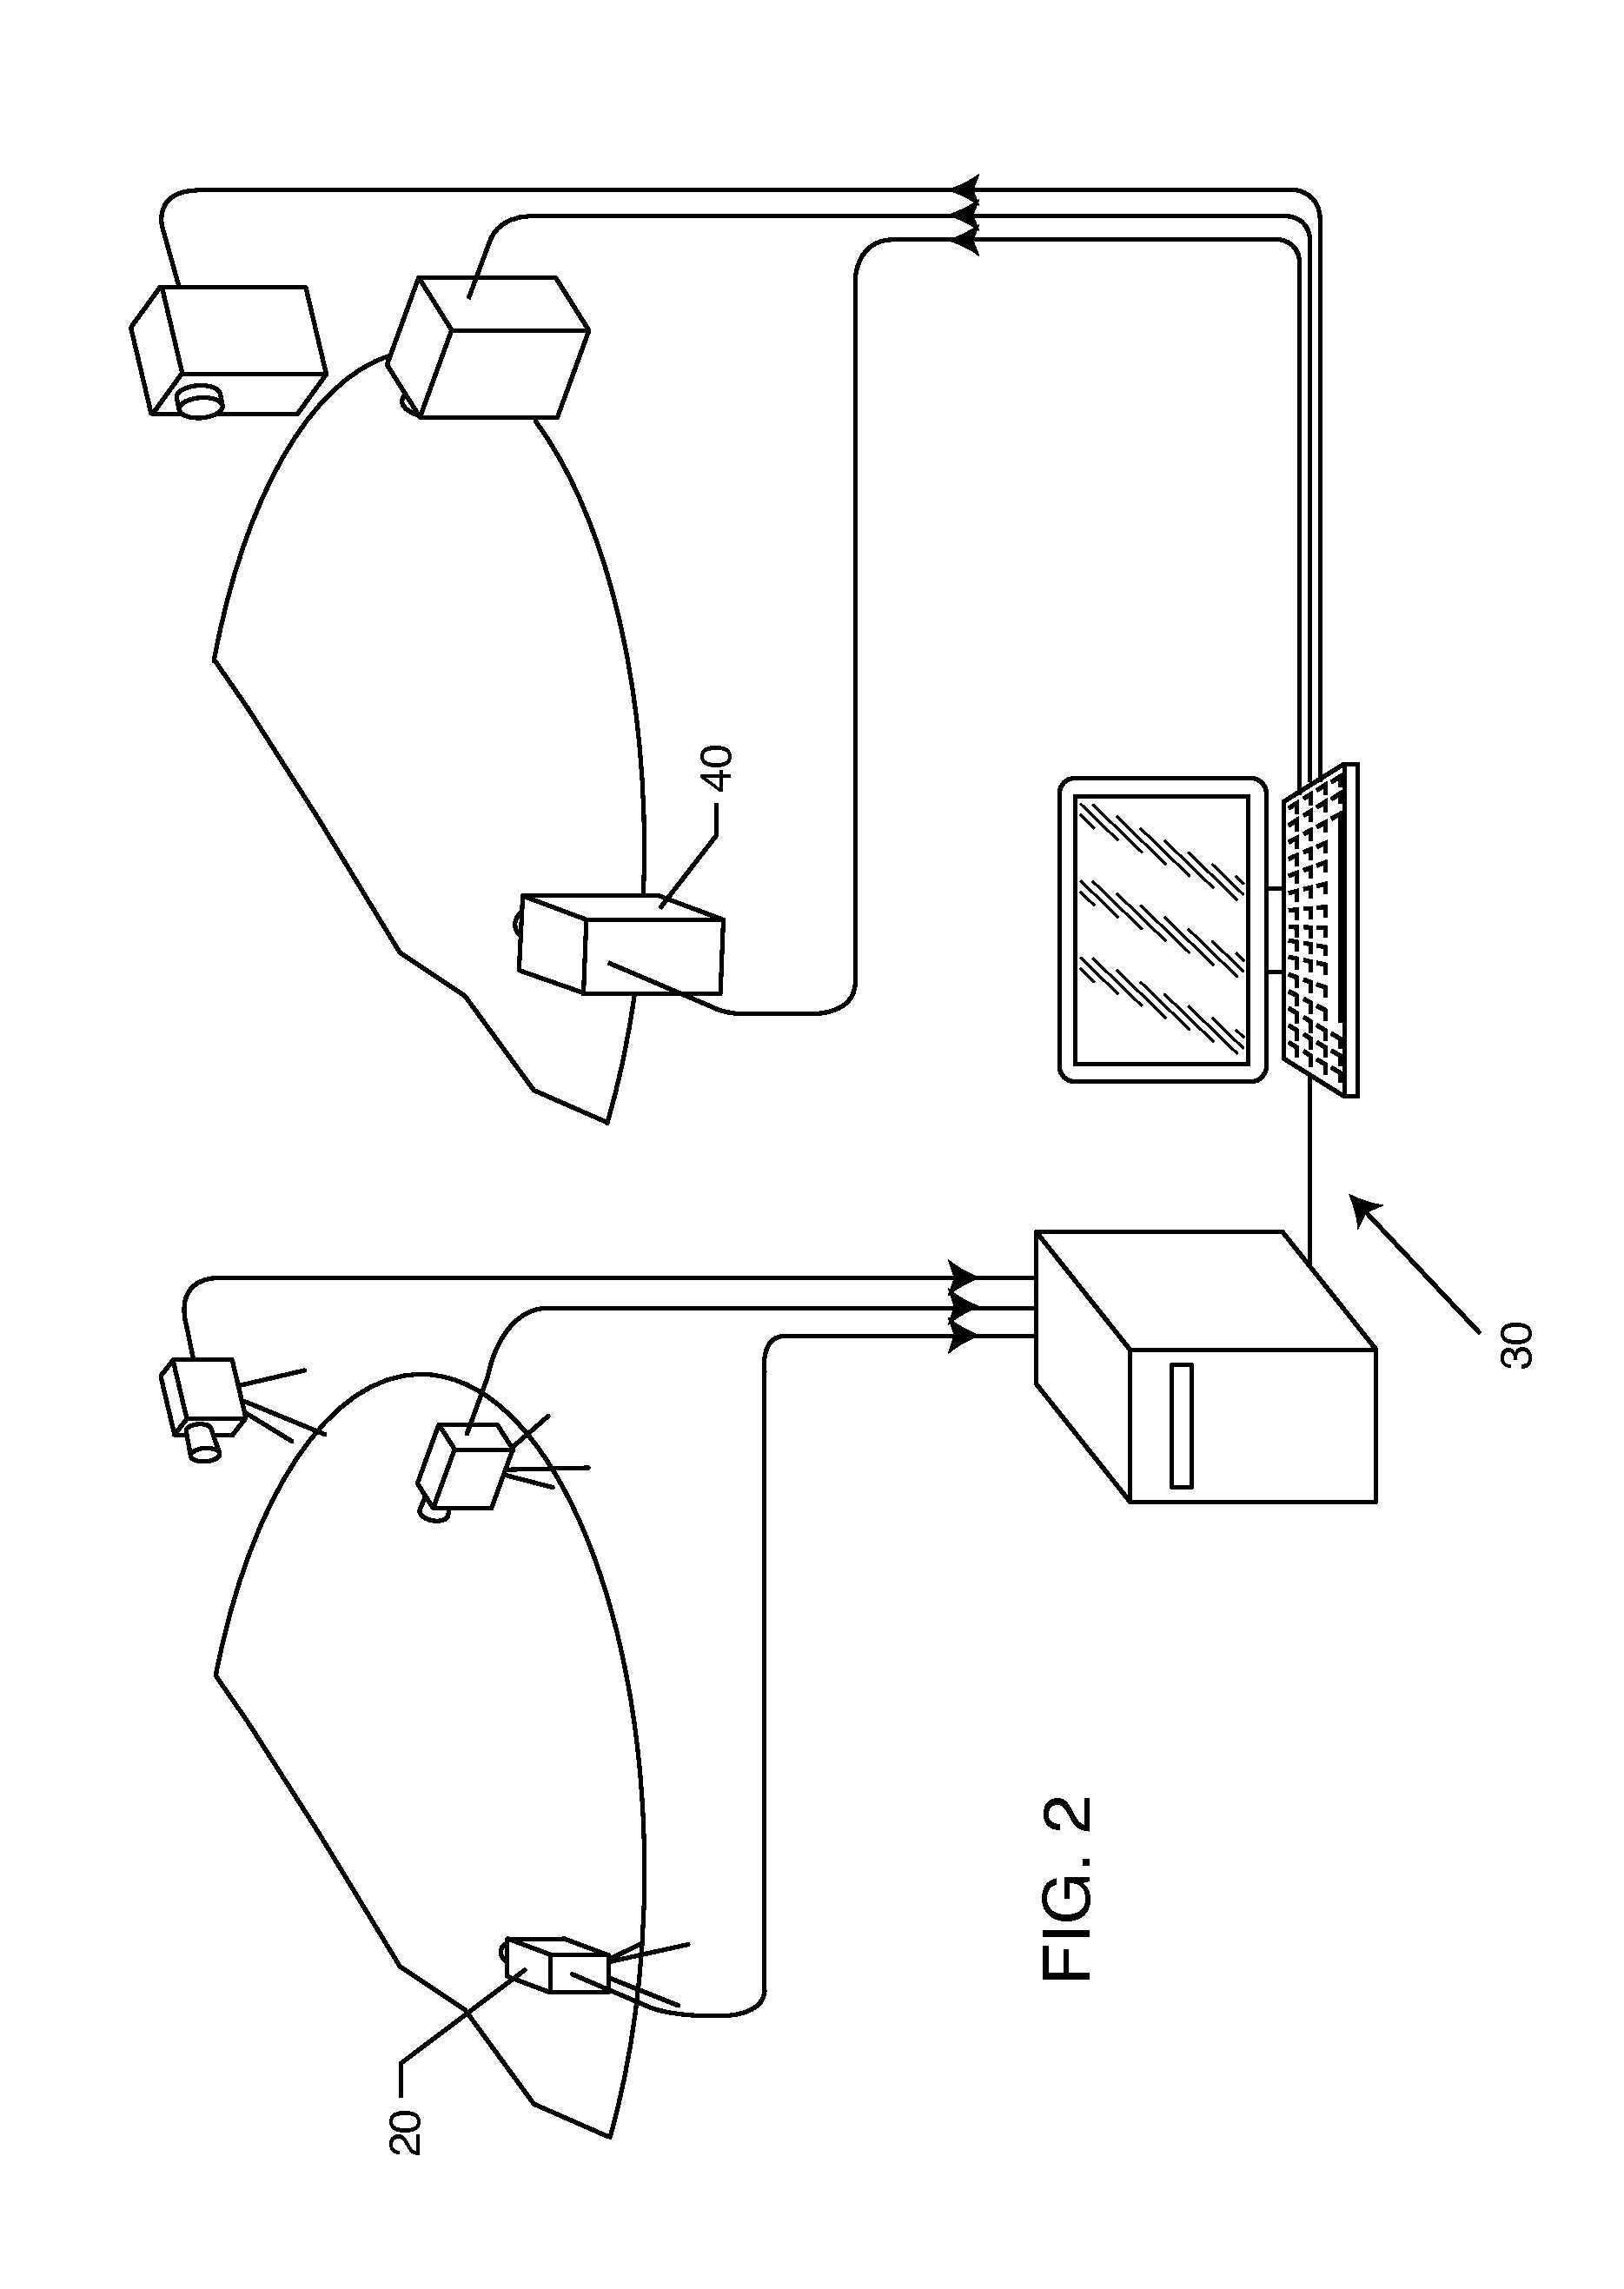 Systems and methods for creating three-dimensional image media